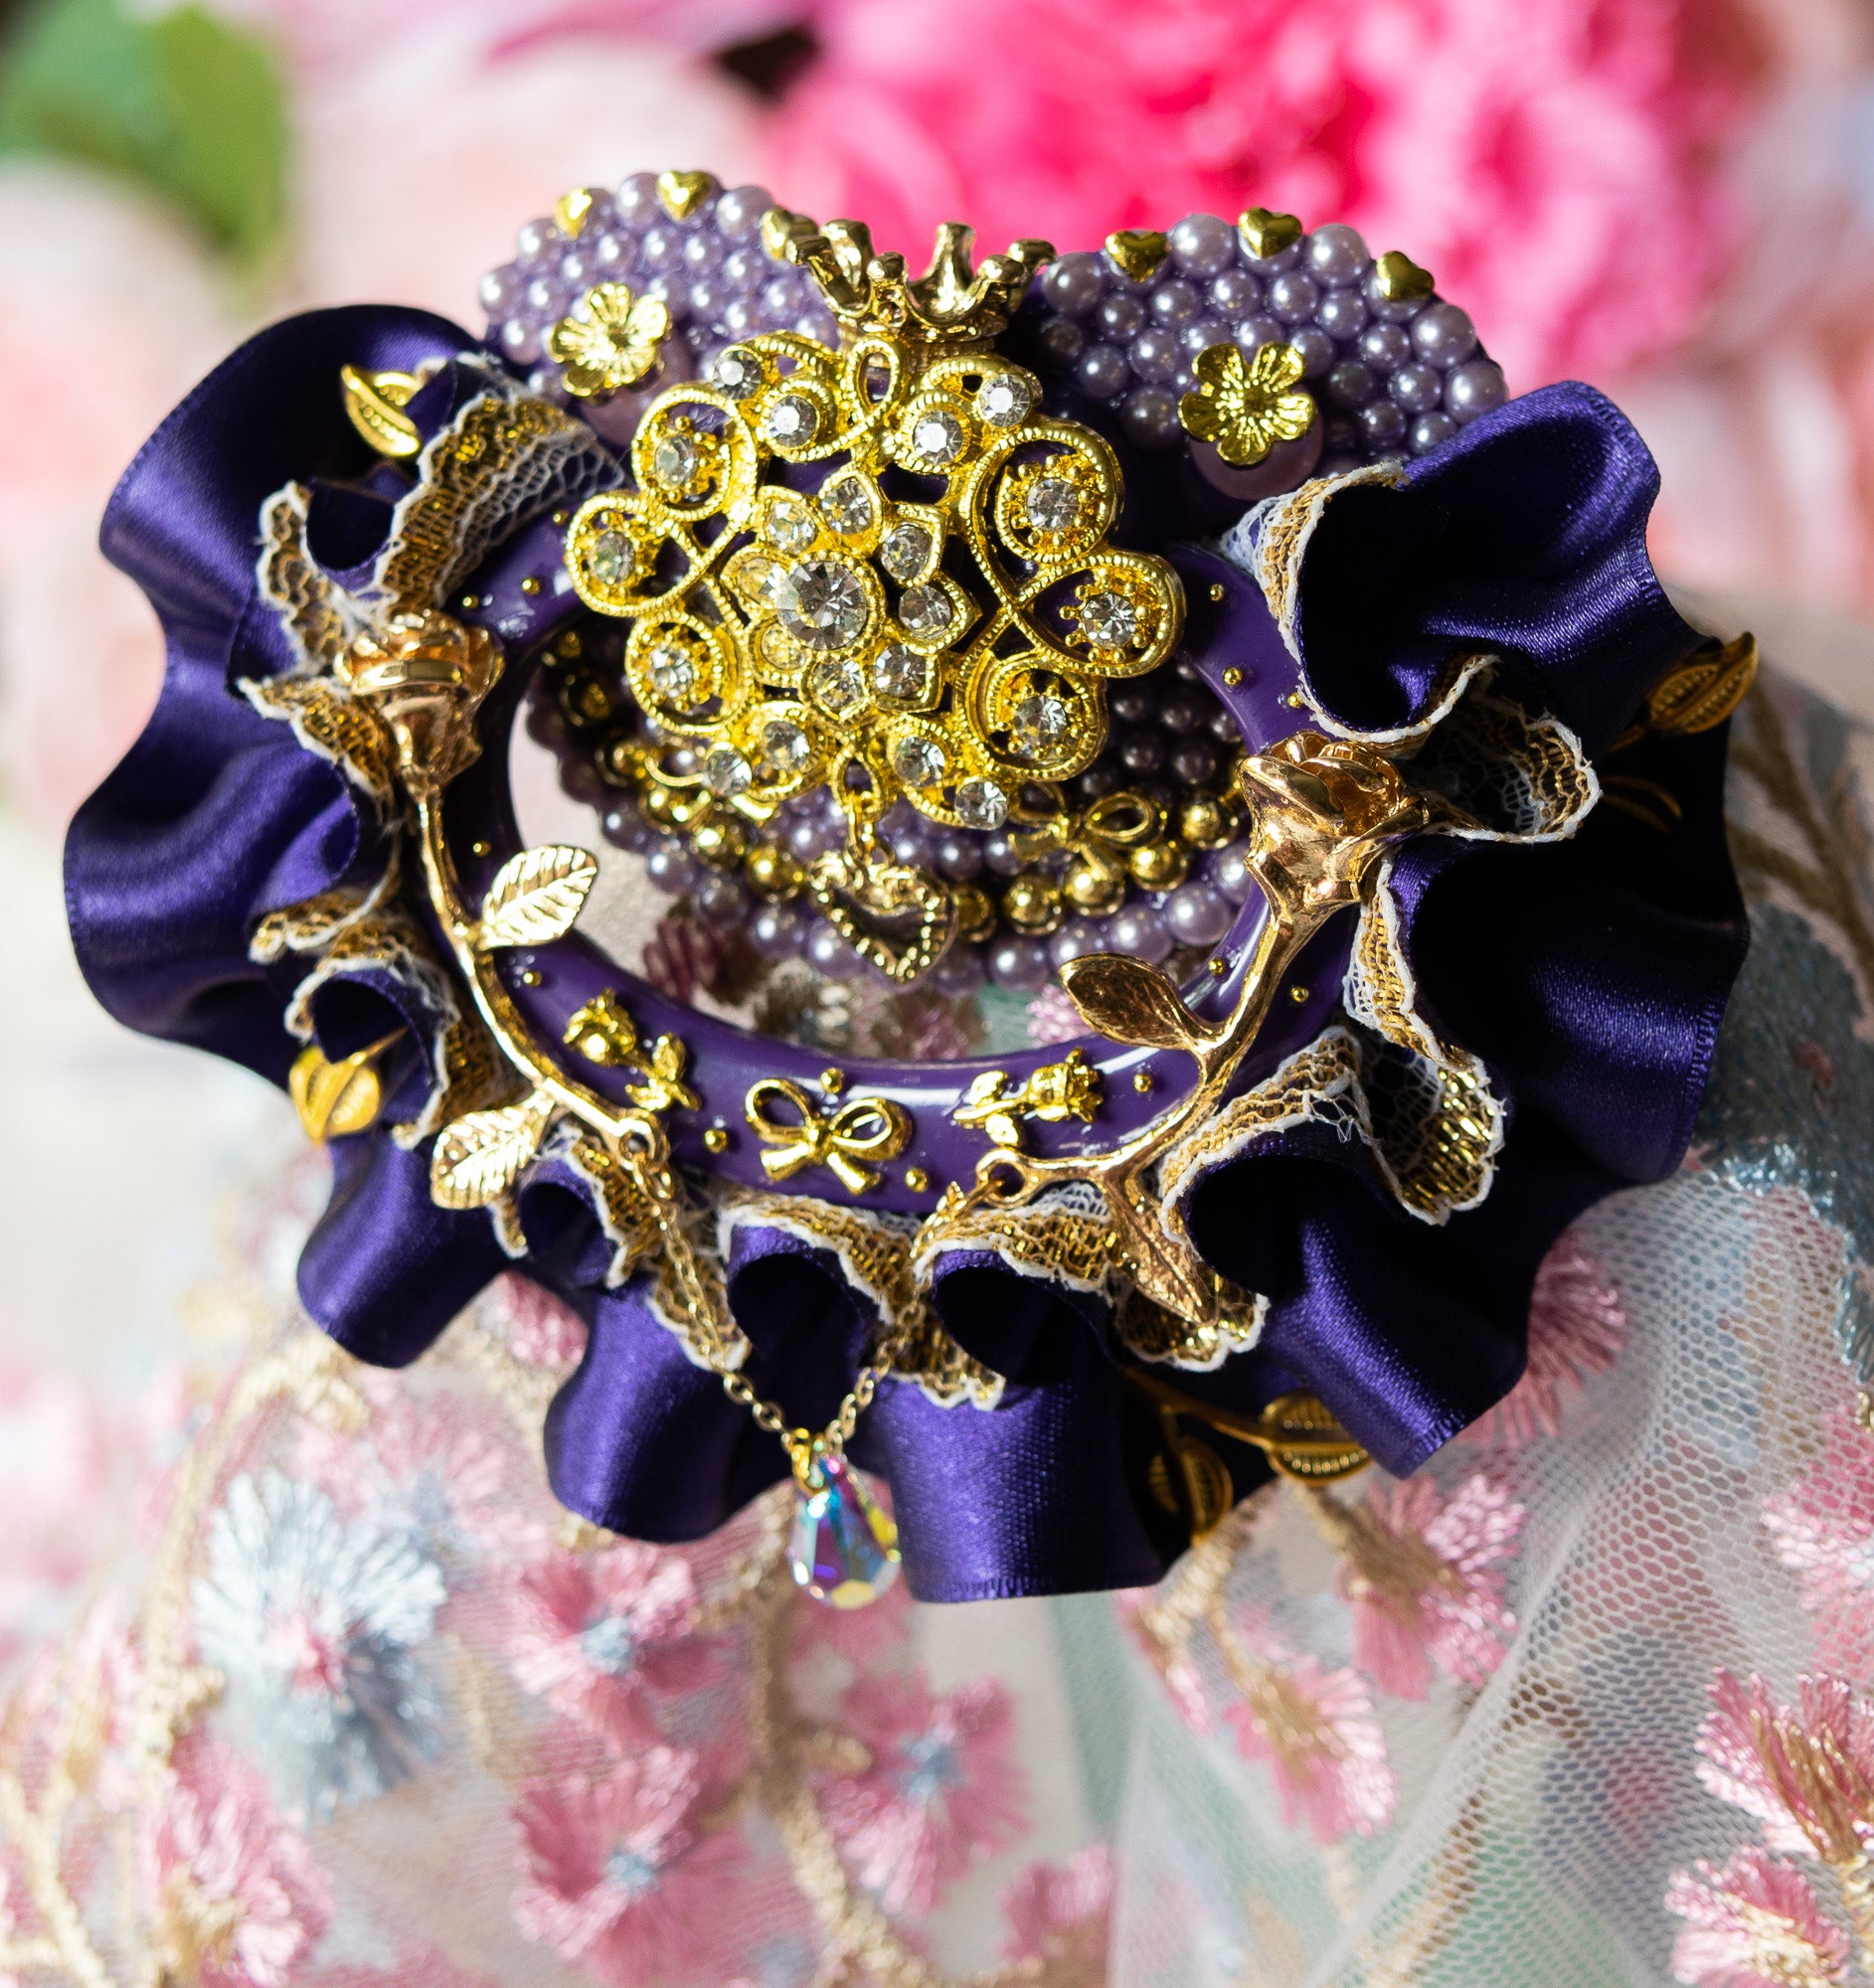 Purple Satin & Gold Lace Frill ~ The Queen's Garden ~ Gold Luxury Adult Pacifier